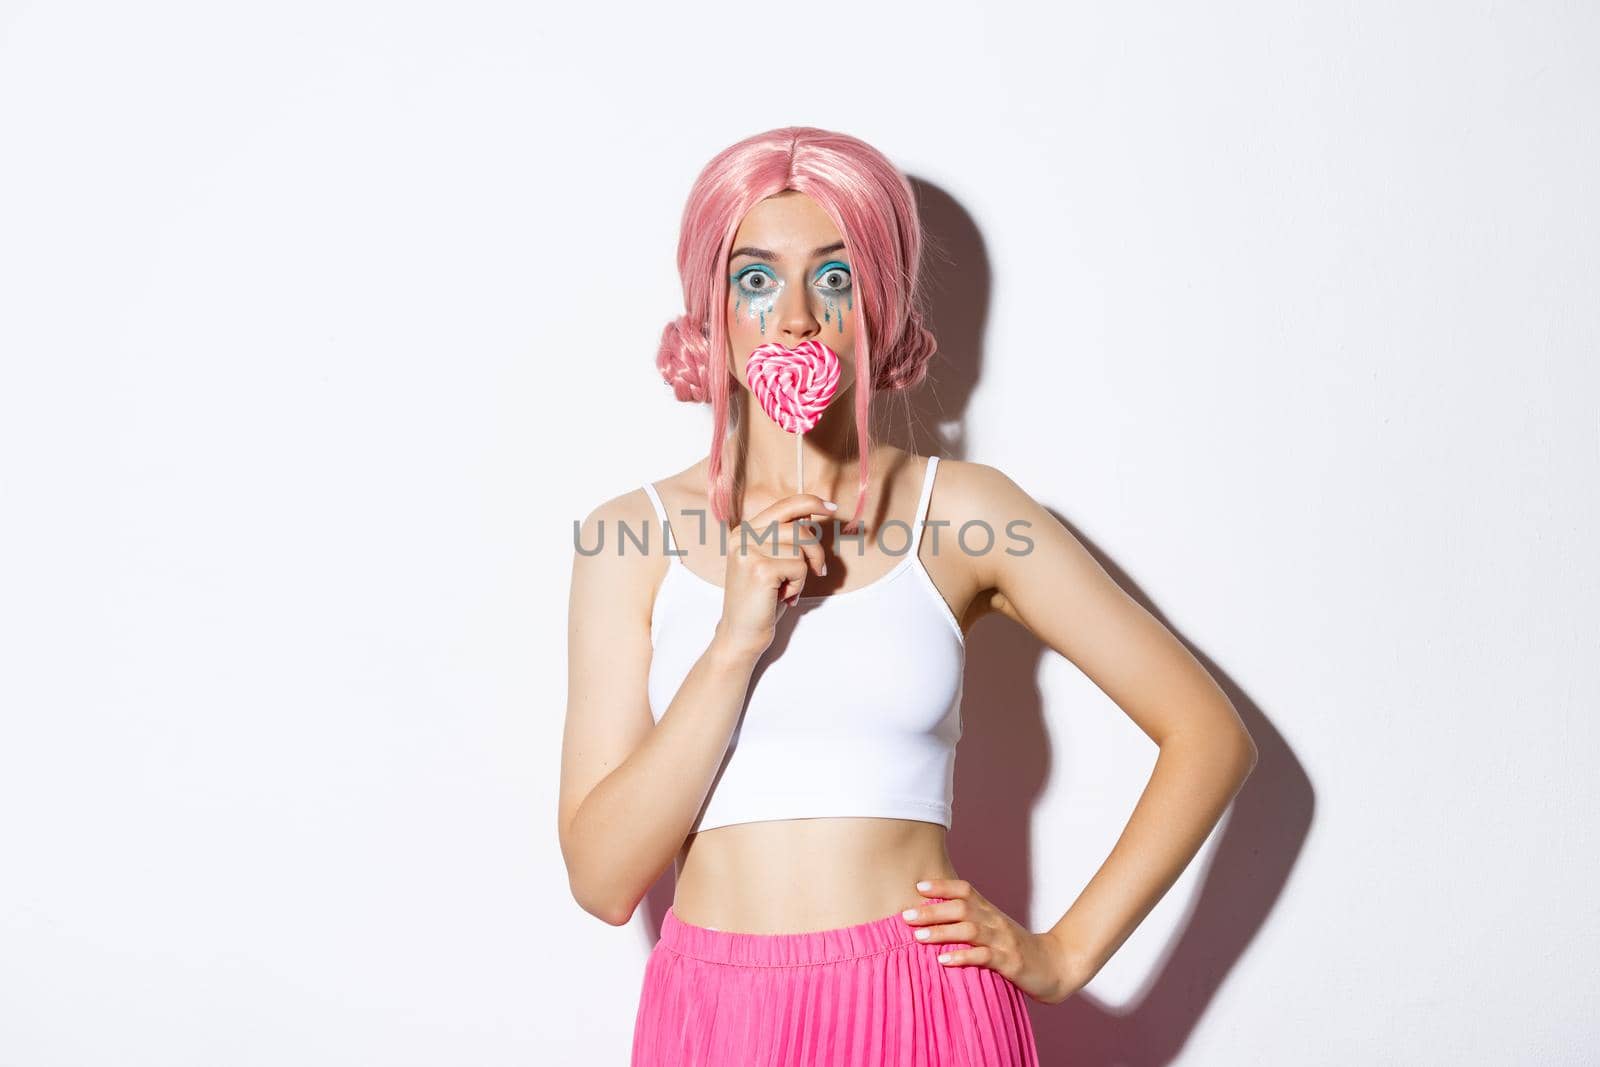 Beautiful smiling girl in pink wig, holding heart-shaped candy, trick or treating in fairy costume on halloween, standing over white background.